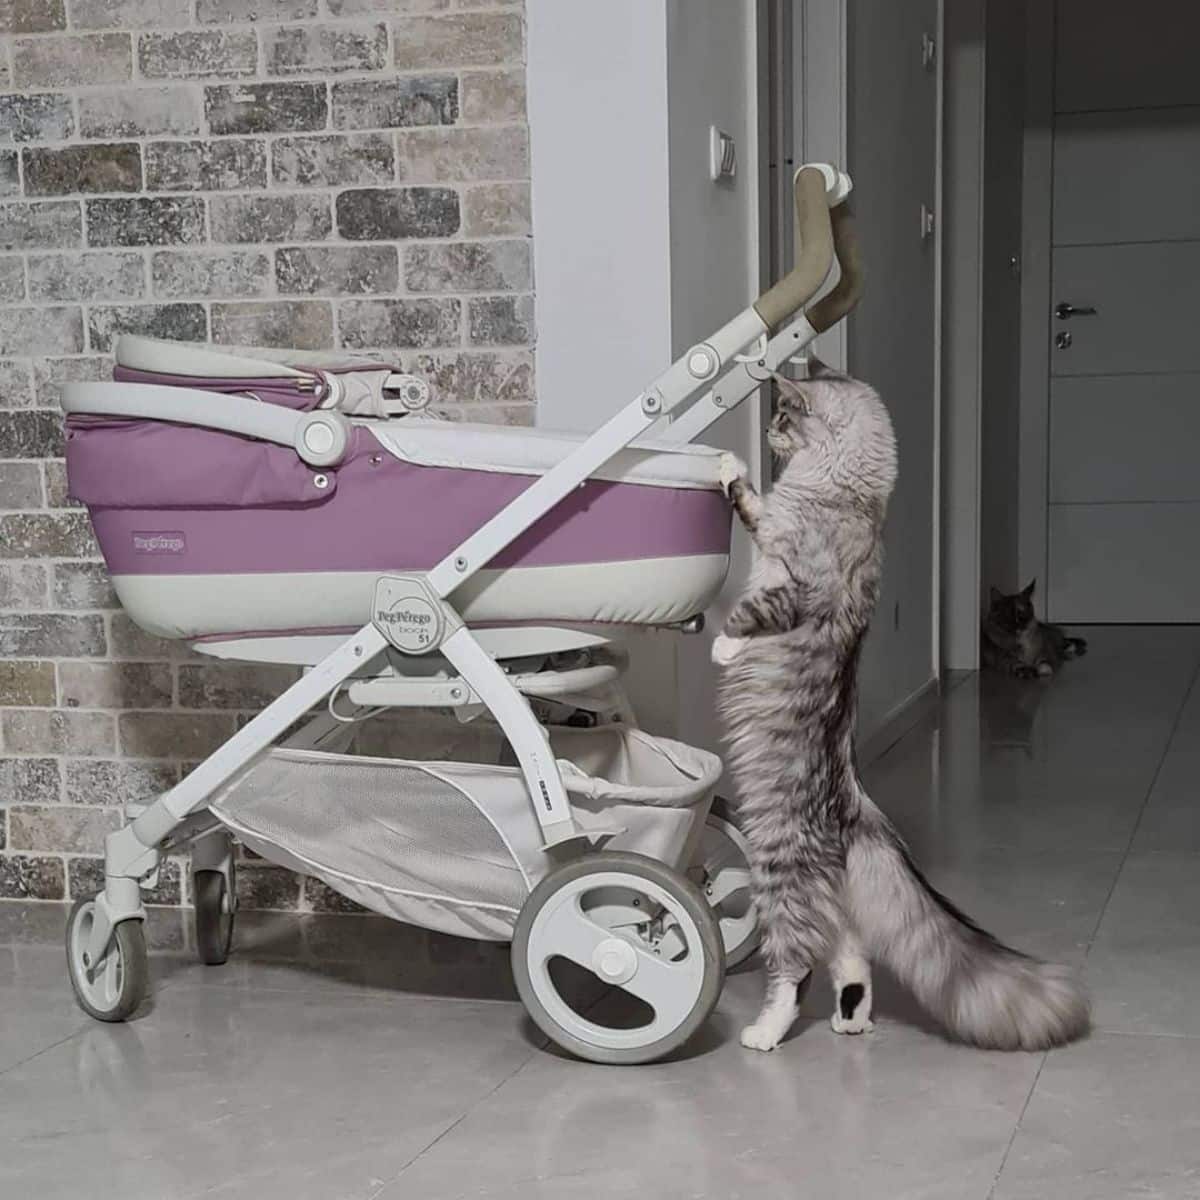 A big tall silver maine coon looking for a baby in a stroller.